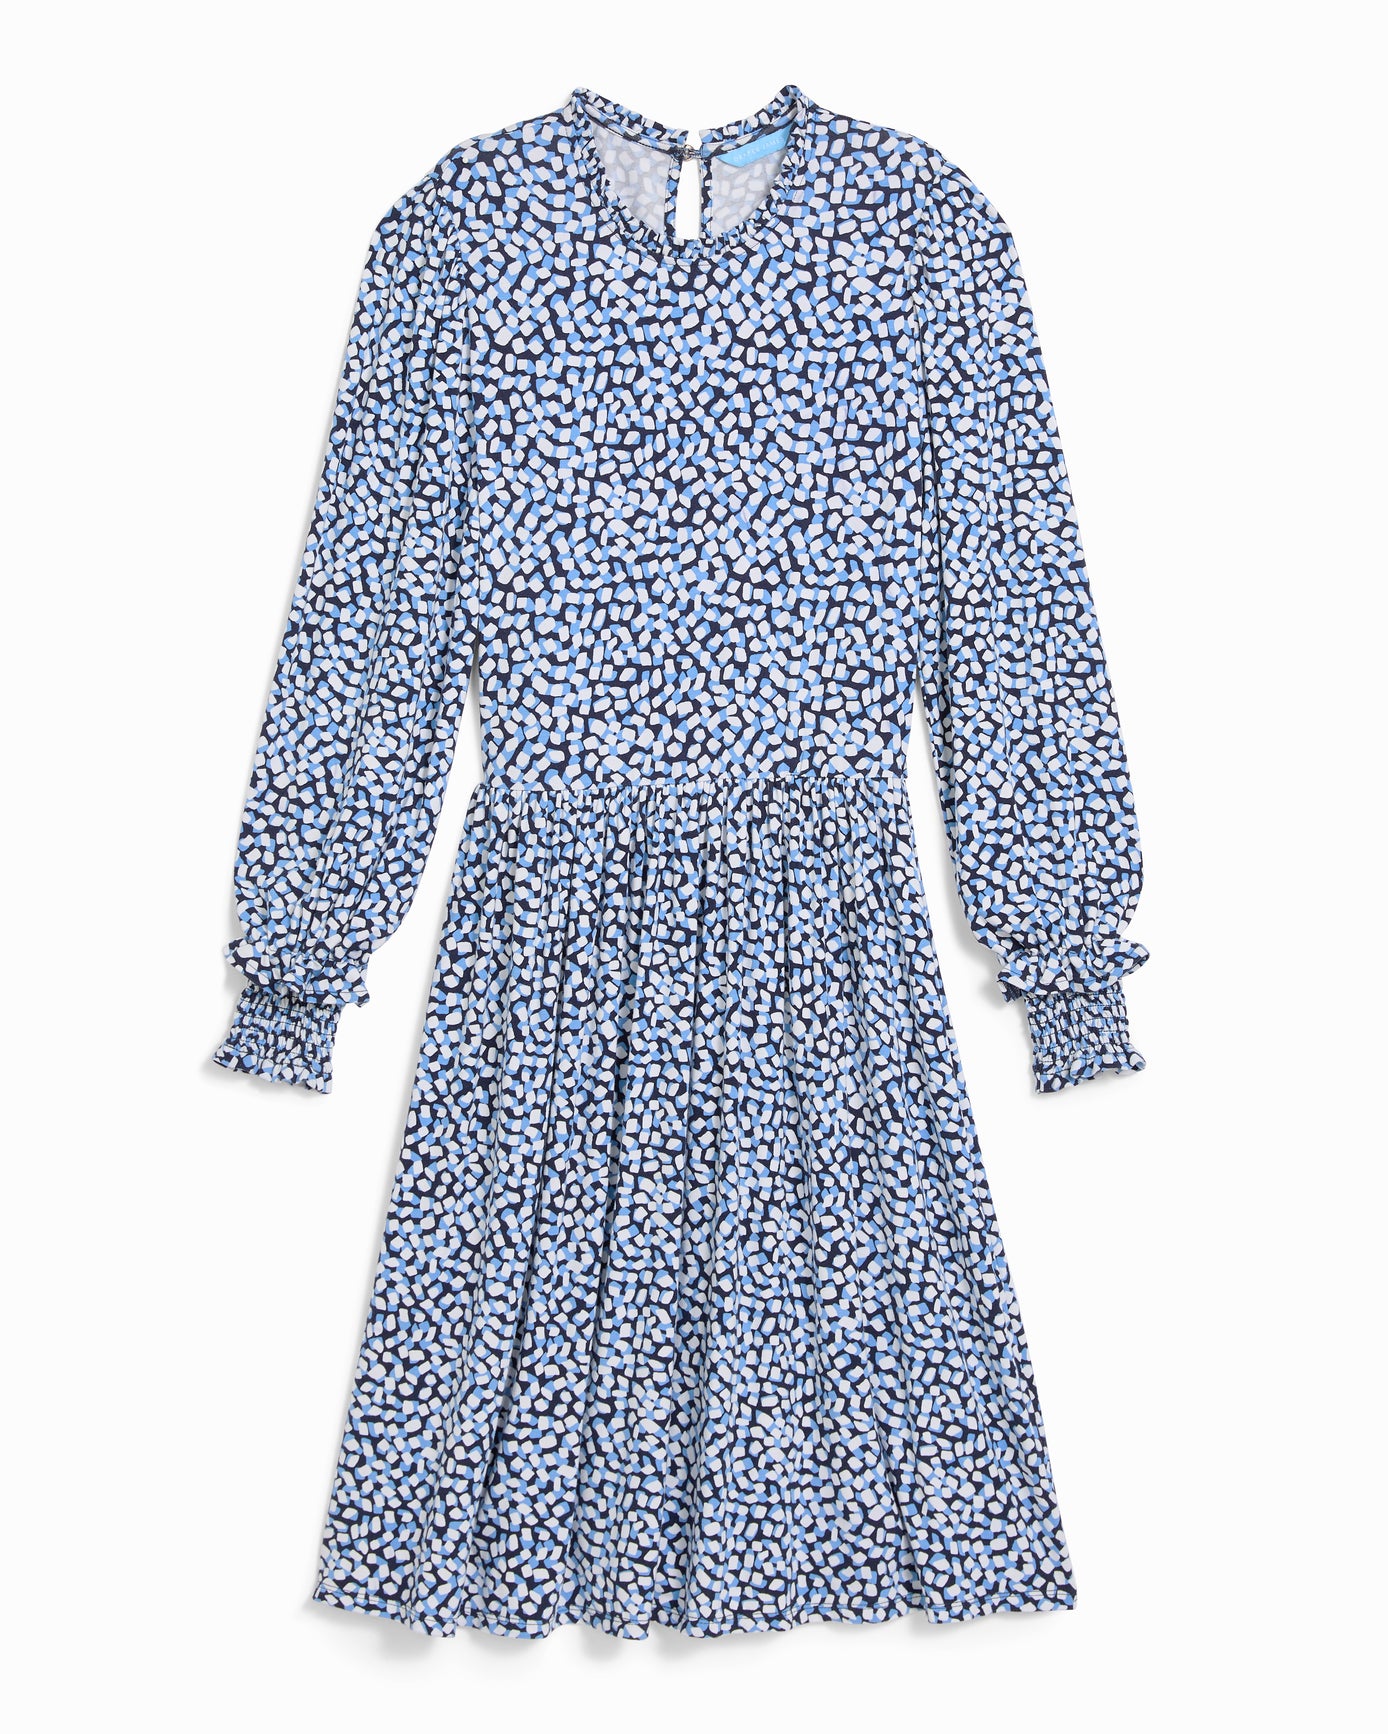 Kitty Dress in Blue Square Dot